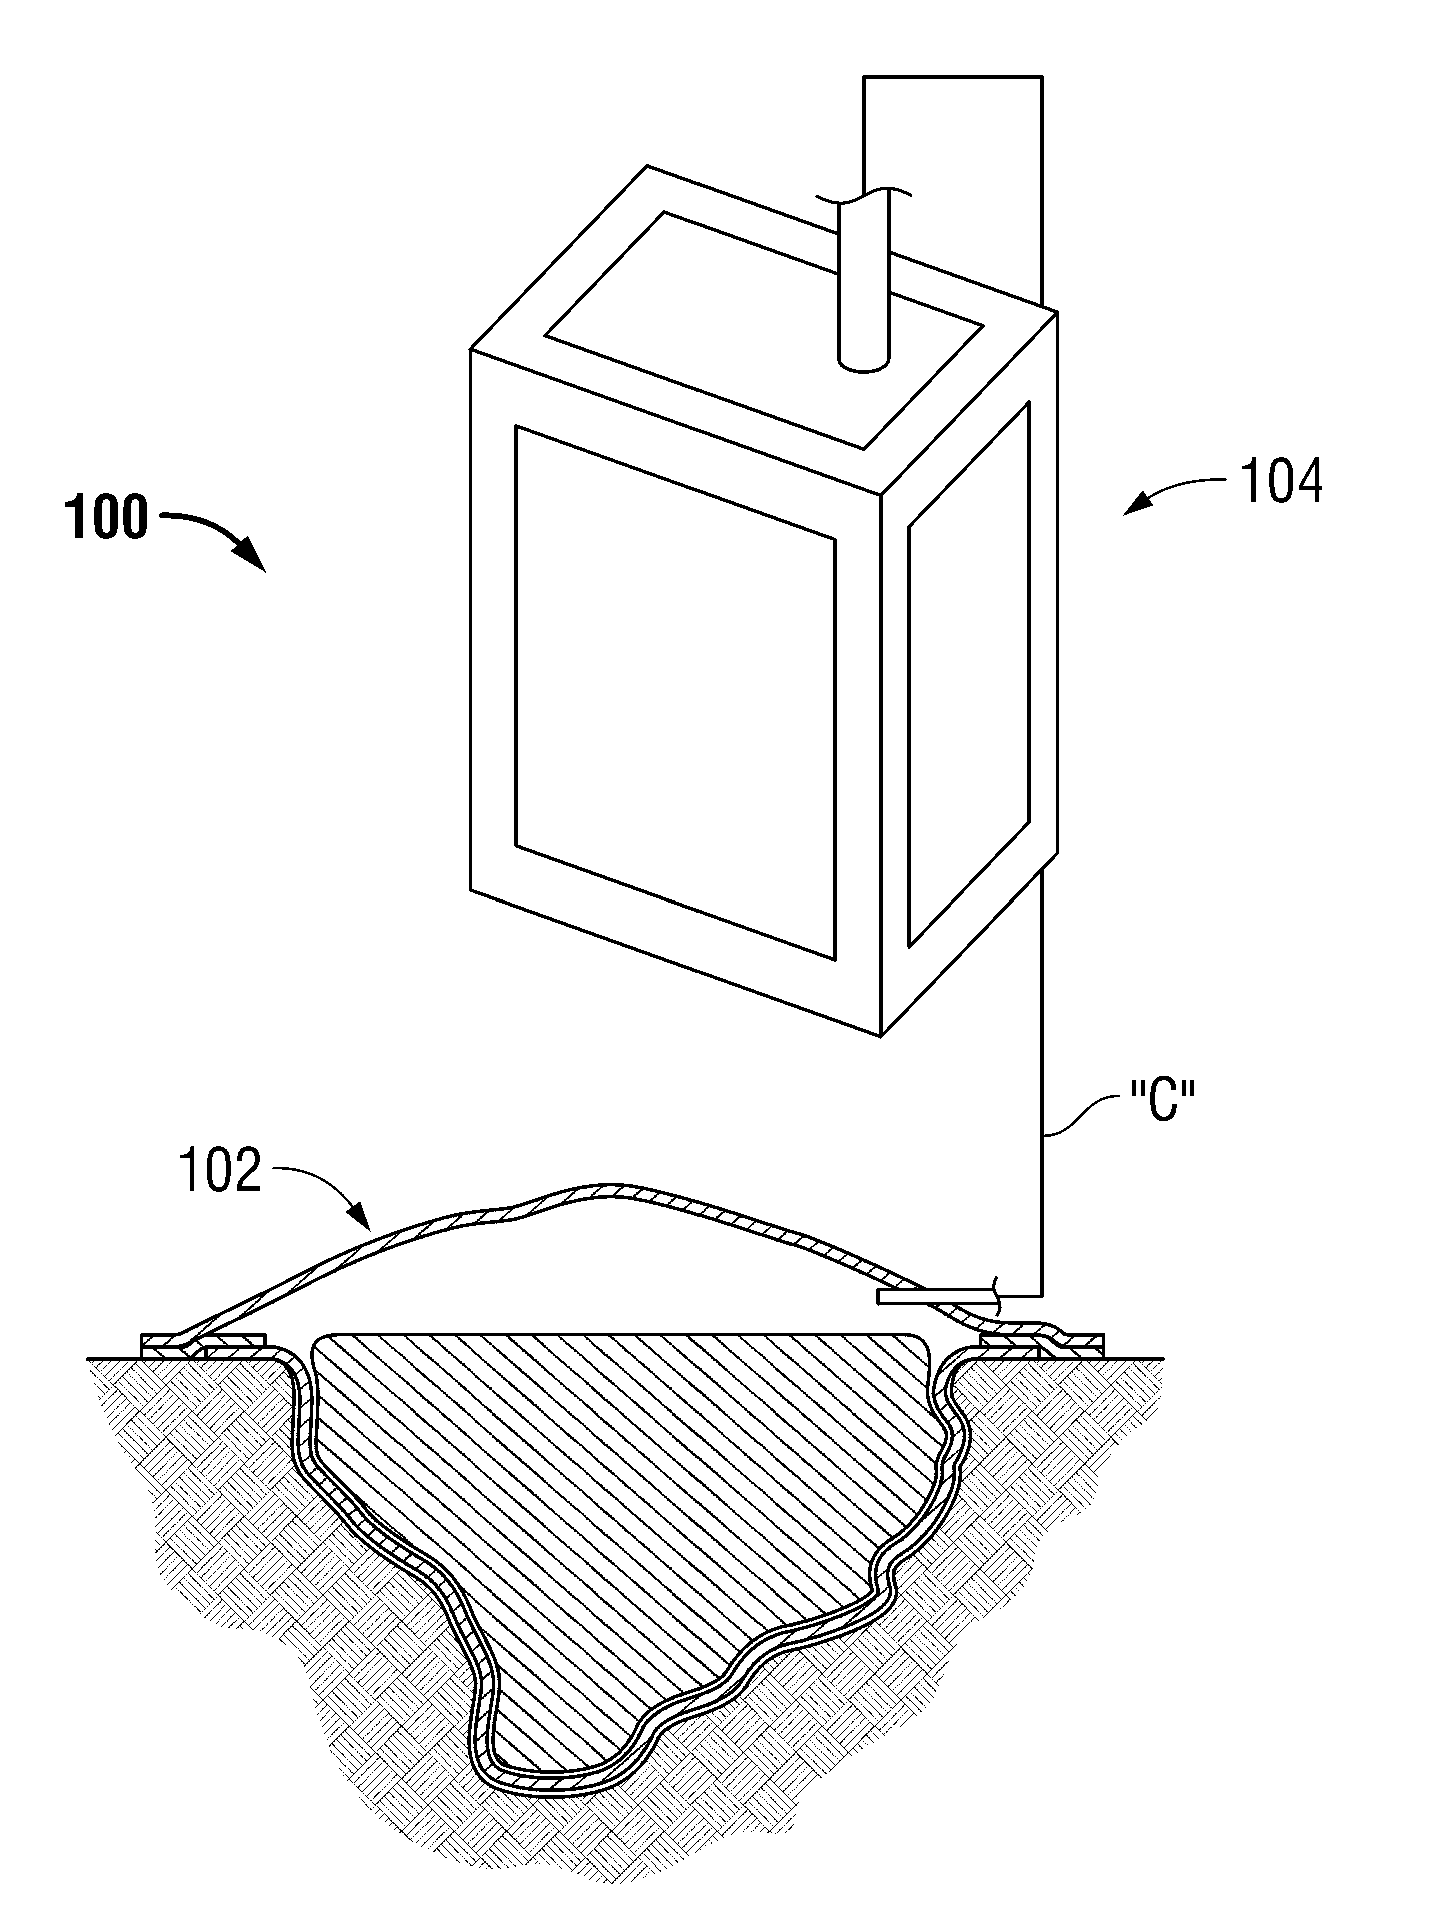 Subatmospheric pressure mechanism for wound therapy system